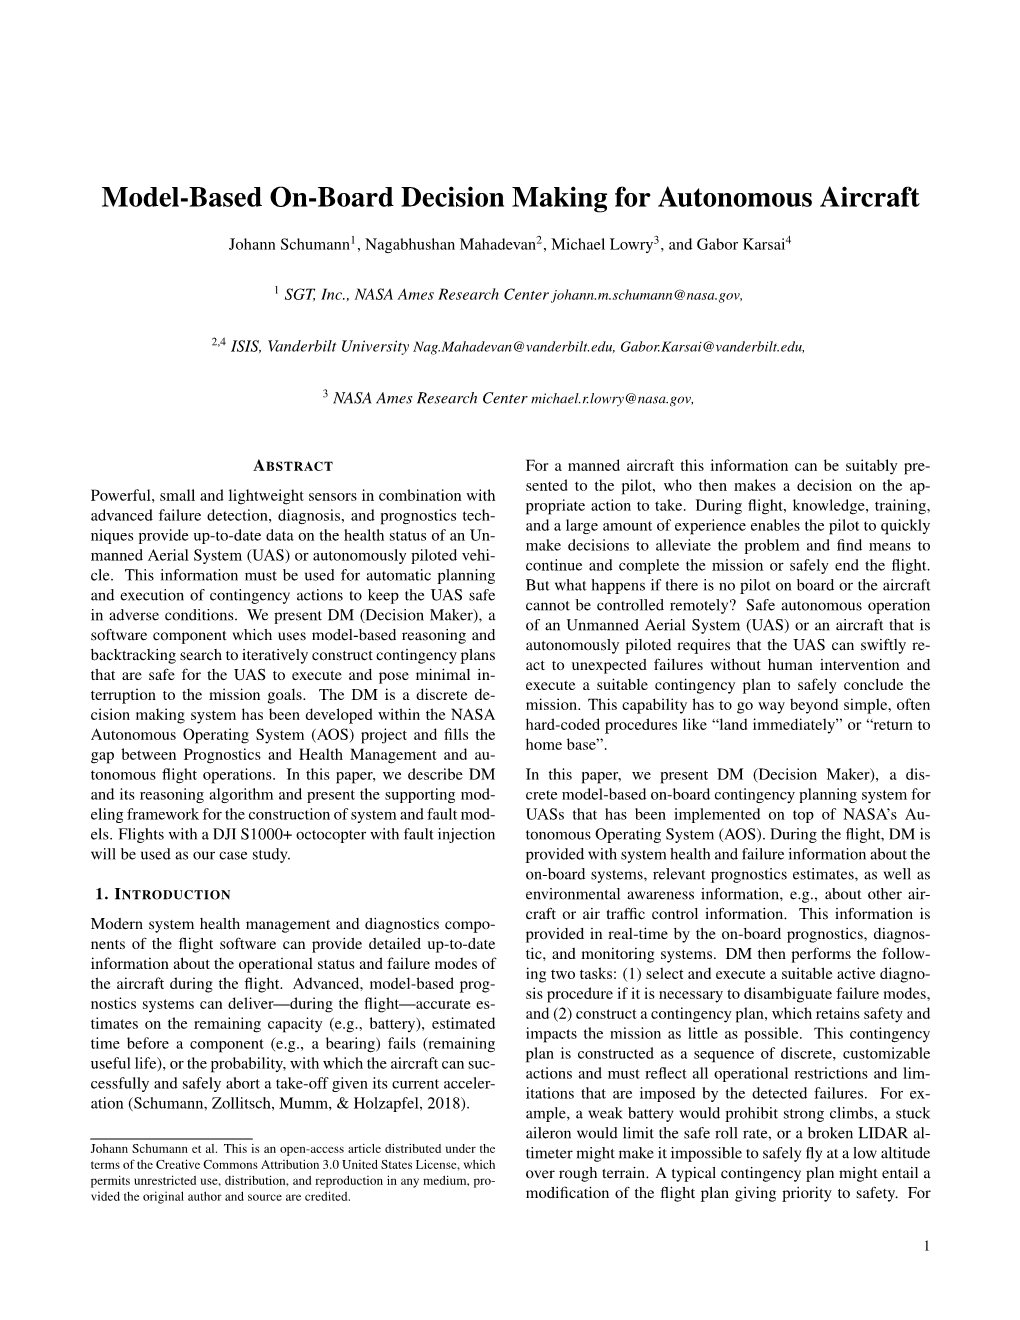 Model-Based On-Board Decision Making for Autonomous Aircraft